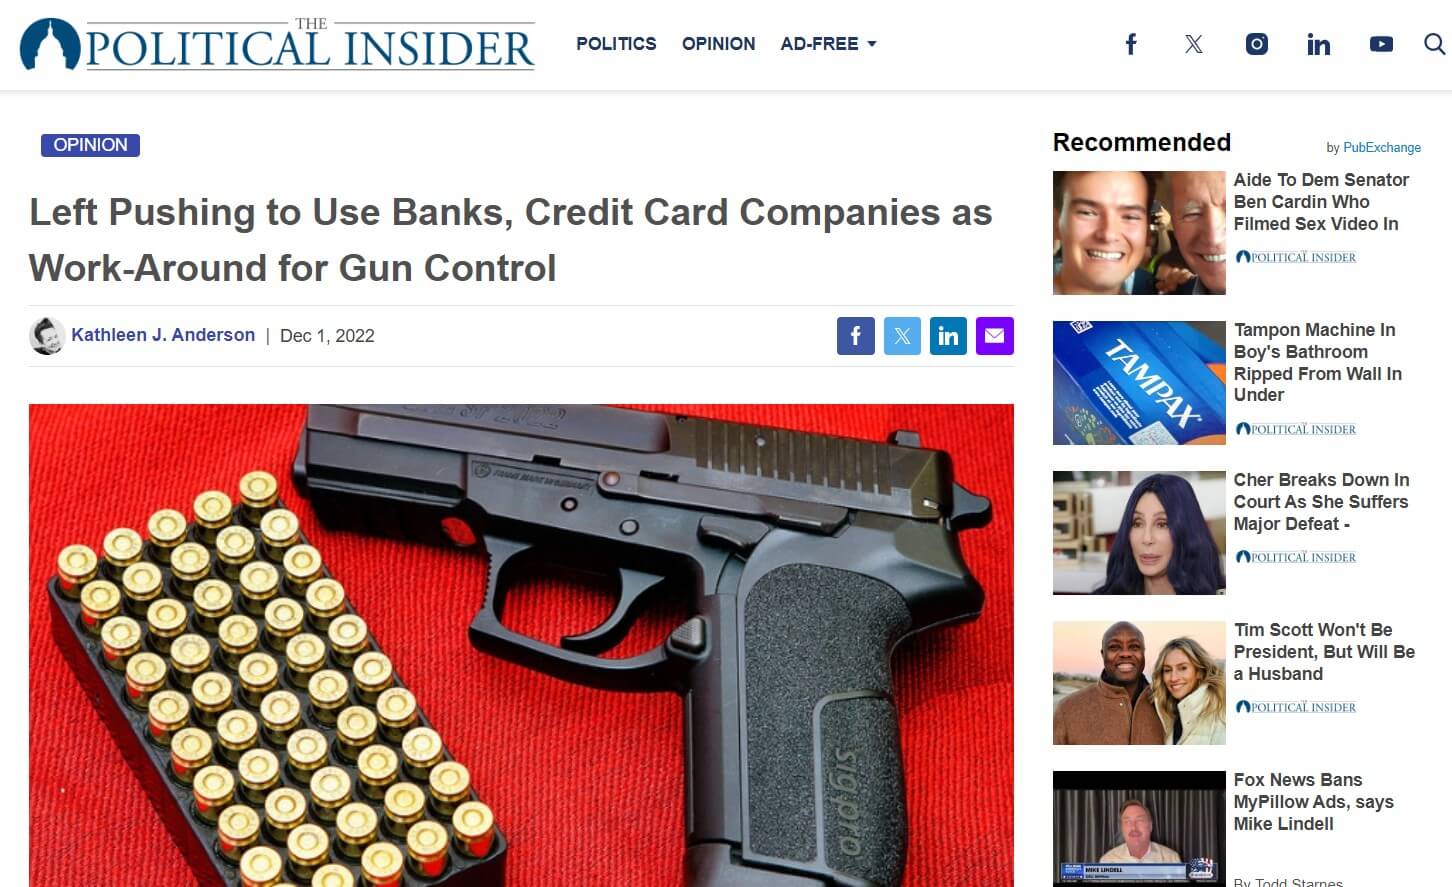 News article screen capture: Left Pushing to Use Banks, Credit Card Companies as Work-Around for Gun Control